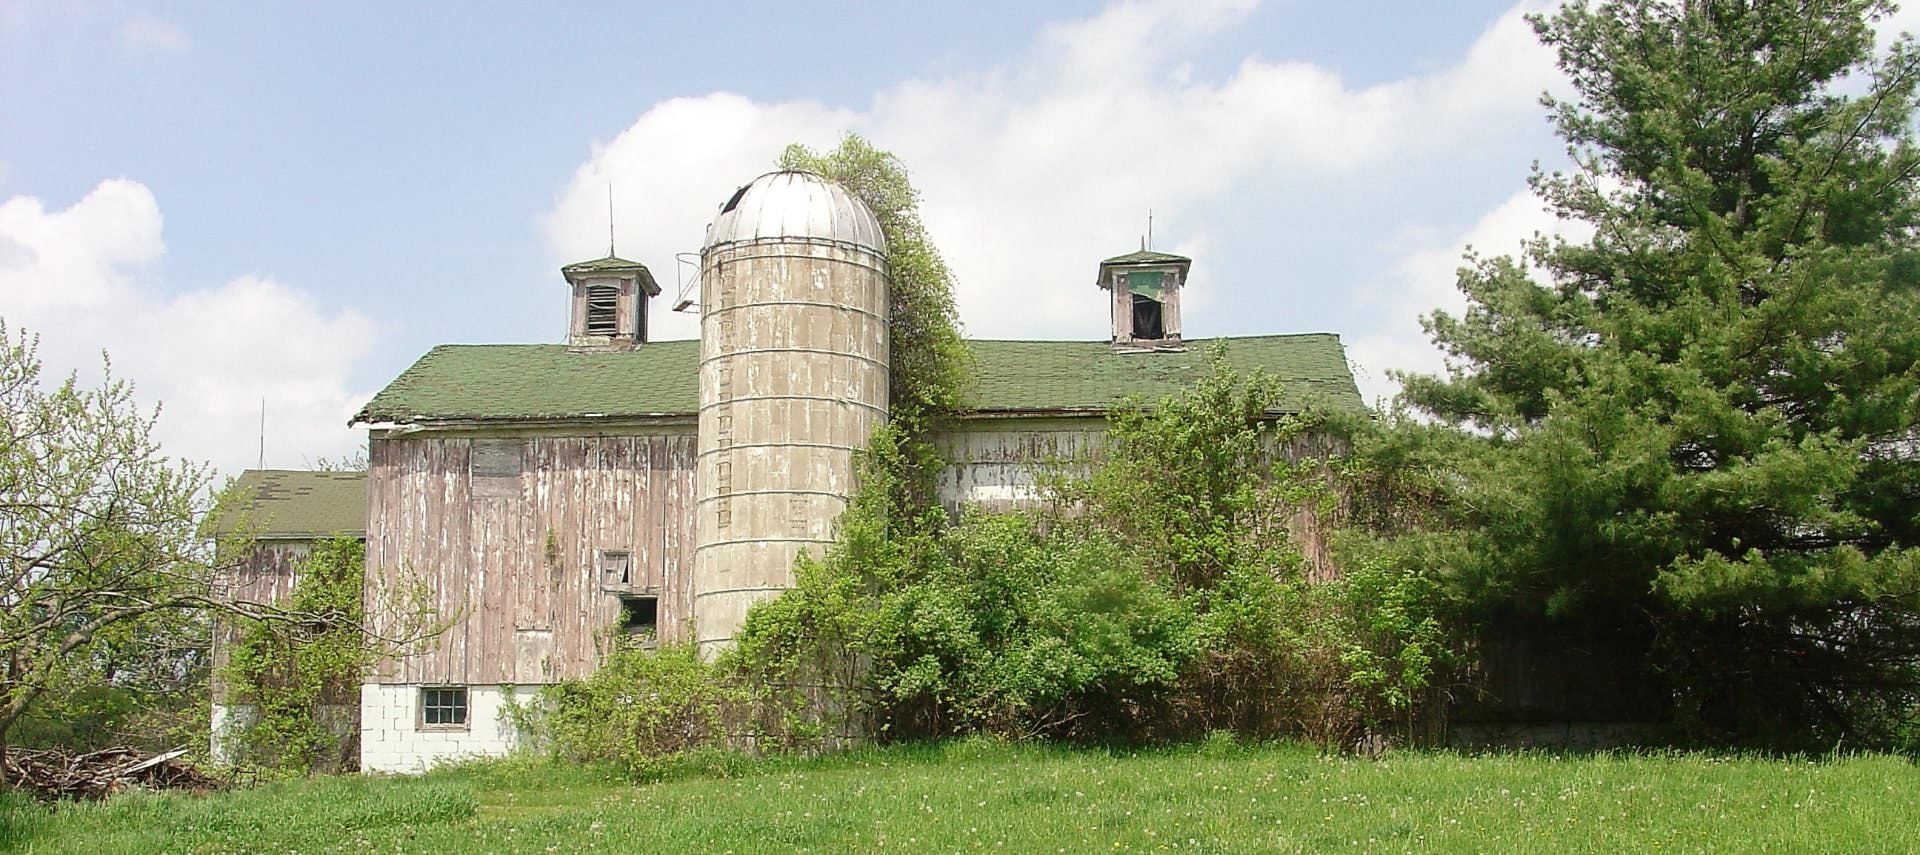 Old barn with worn white paint and attached silo surrounded by green trees, bushes, and grass